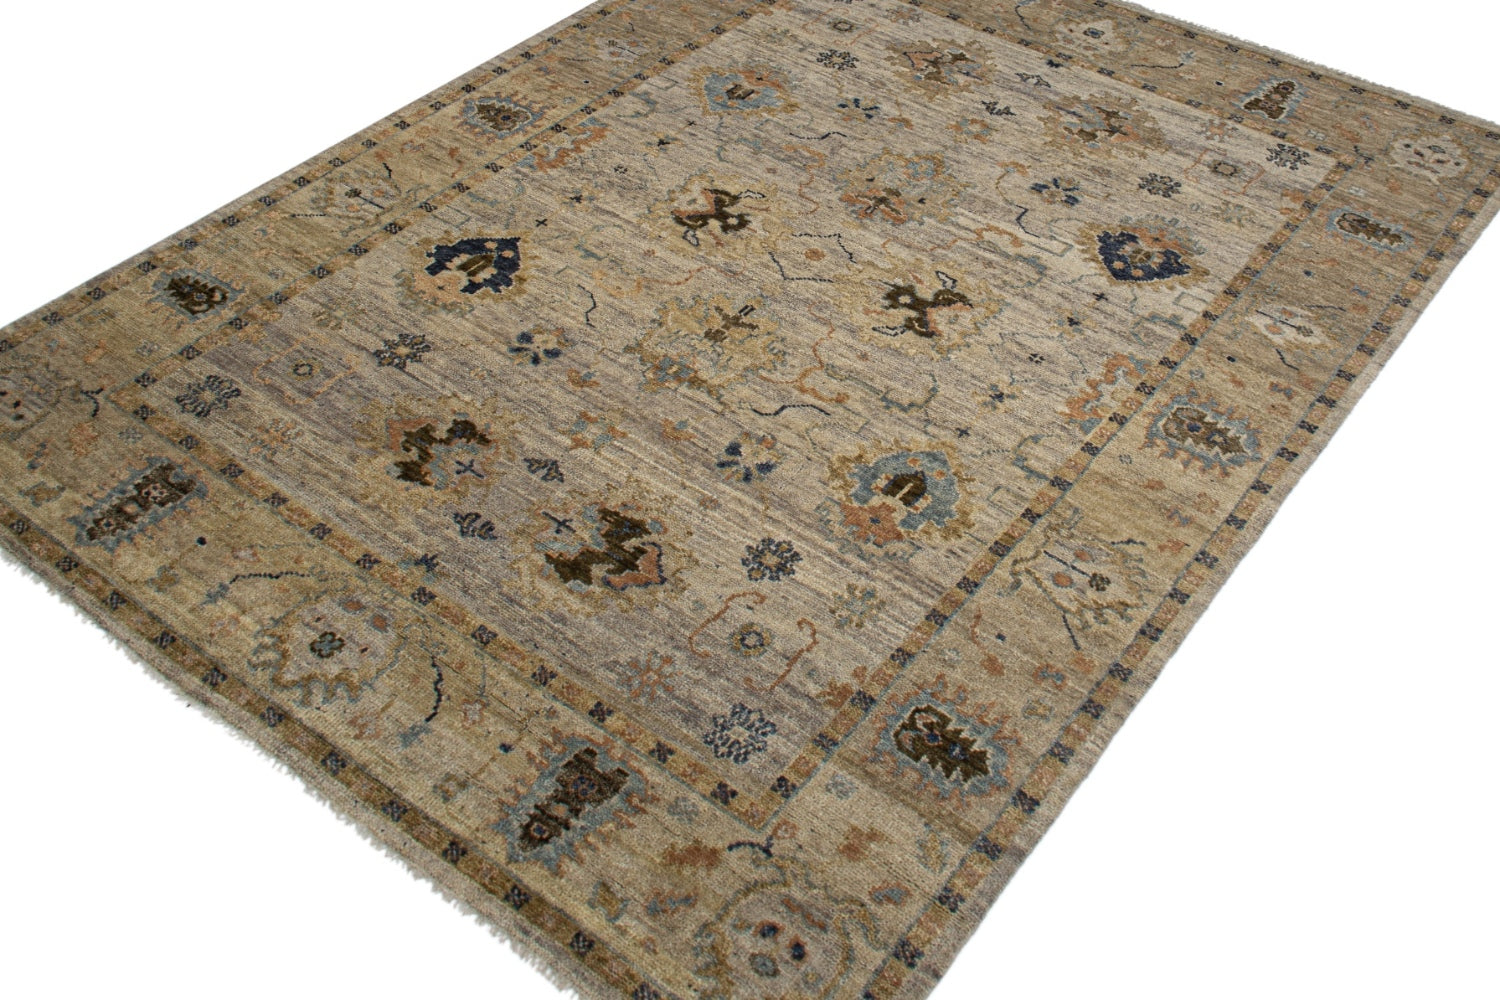 Sultanabad 5 Handwoven Traditional Rug, J71699